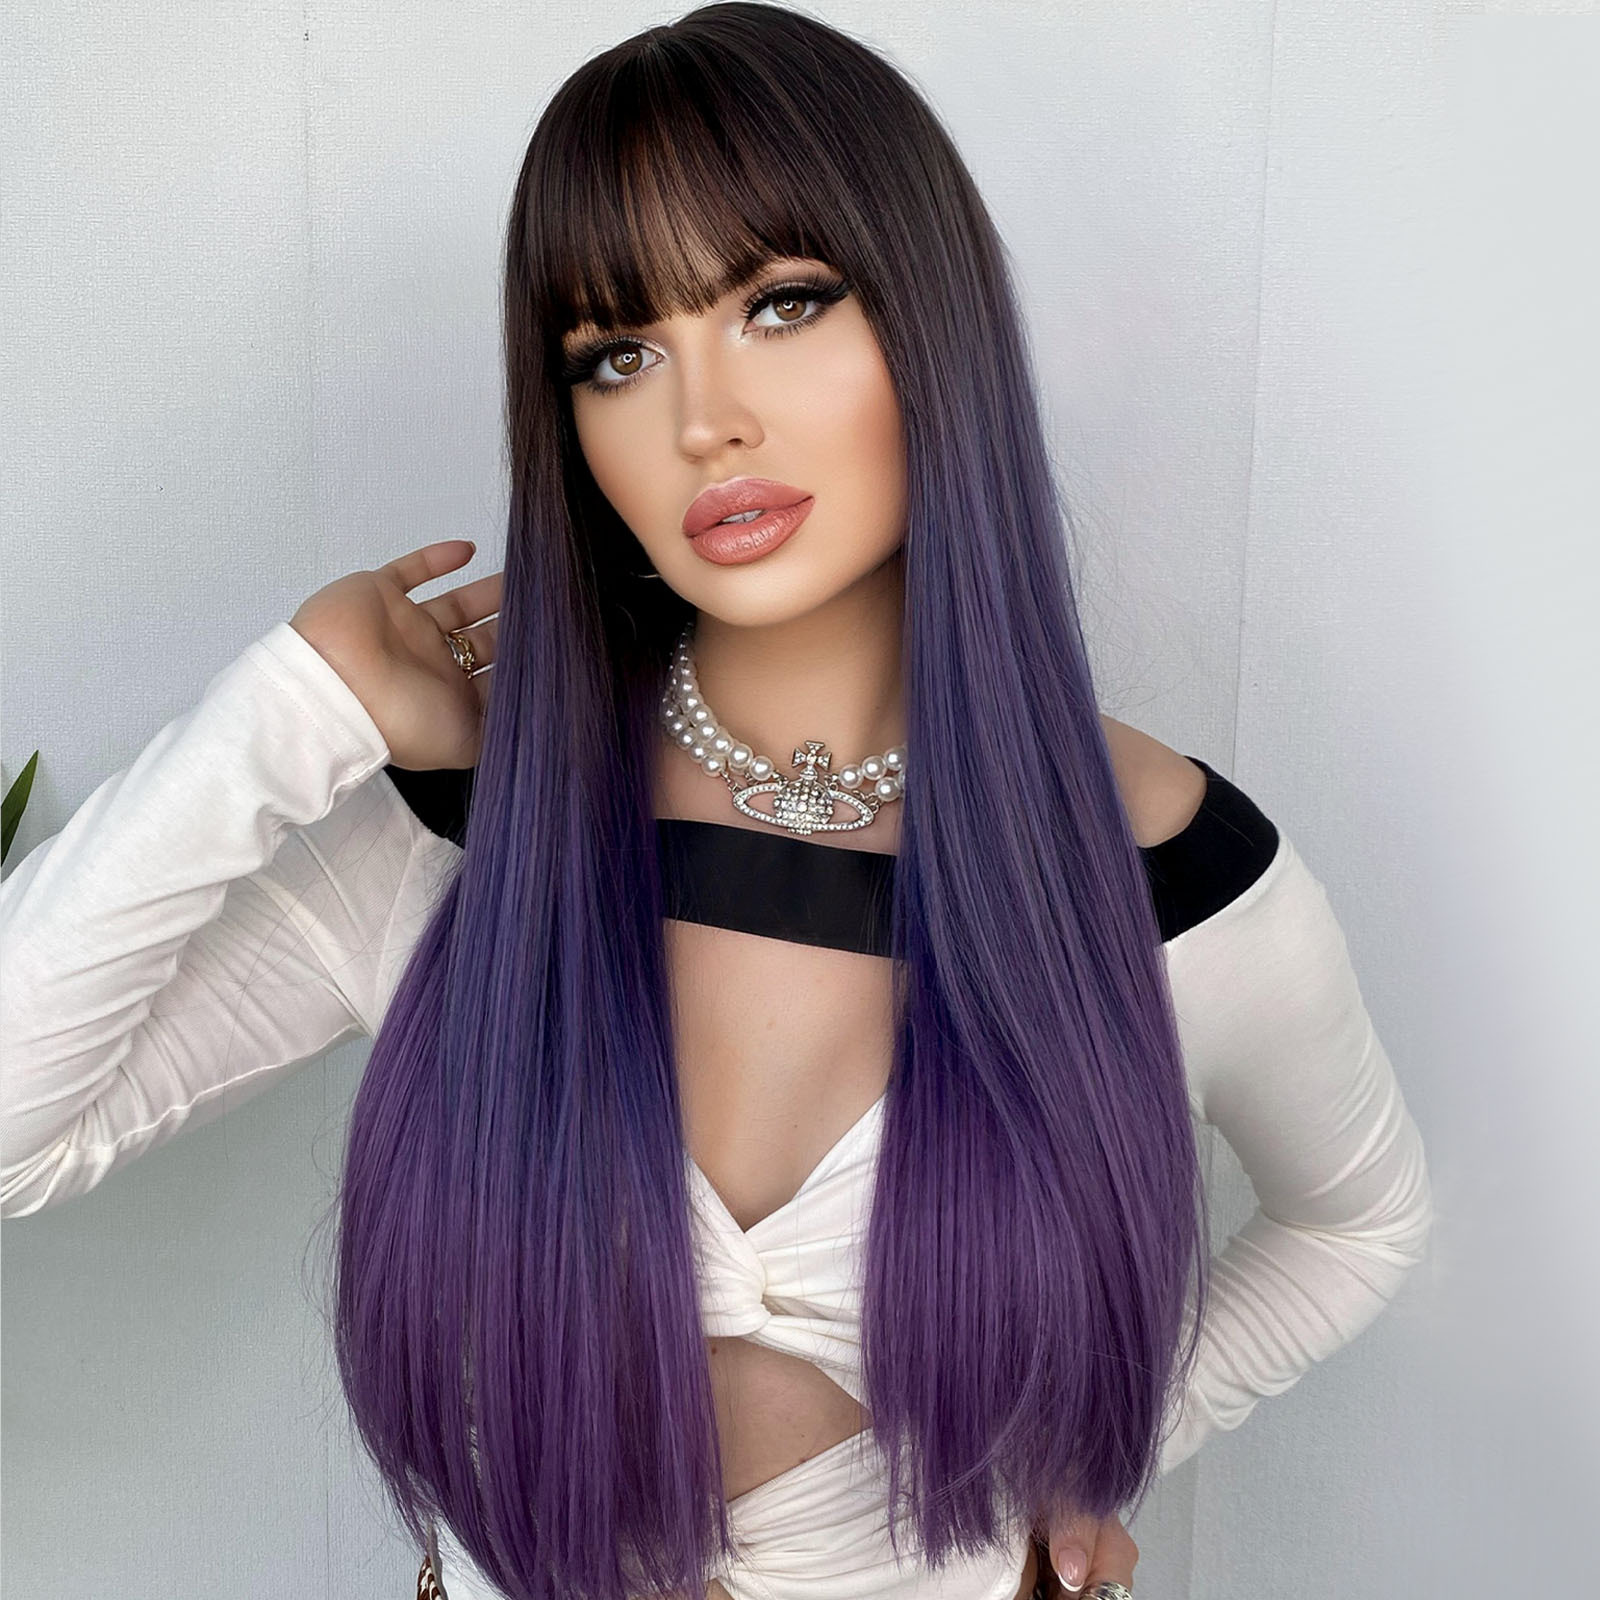 Synthetic wig by Yinraohair in Barbie brown purple color, featuring long straight hair with bangs, stylish full head set, ready to go